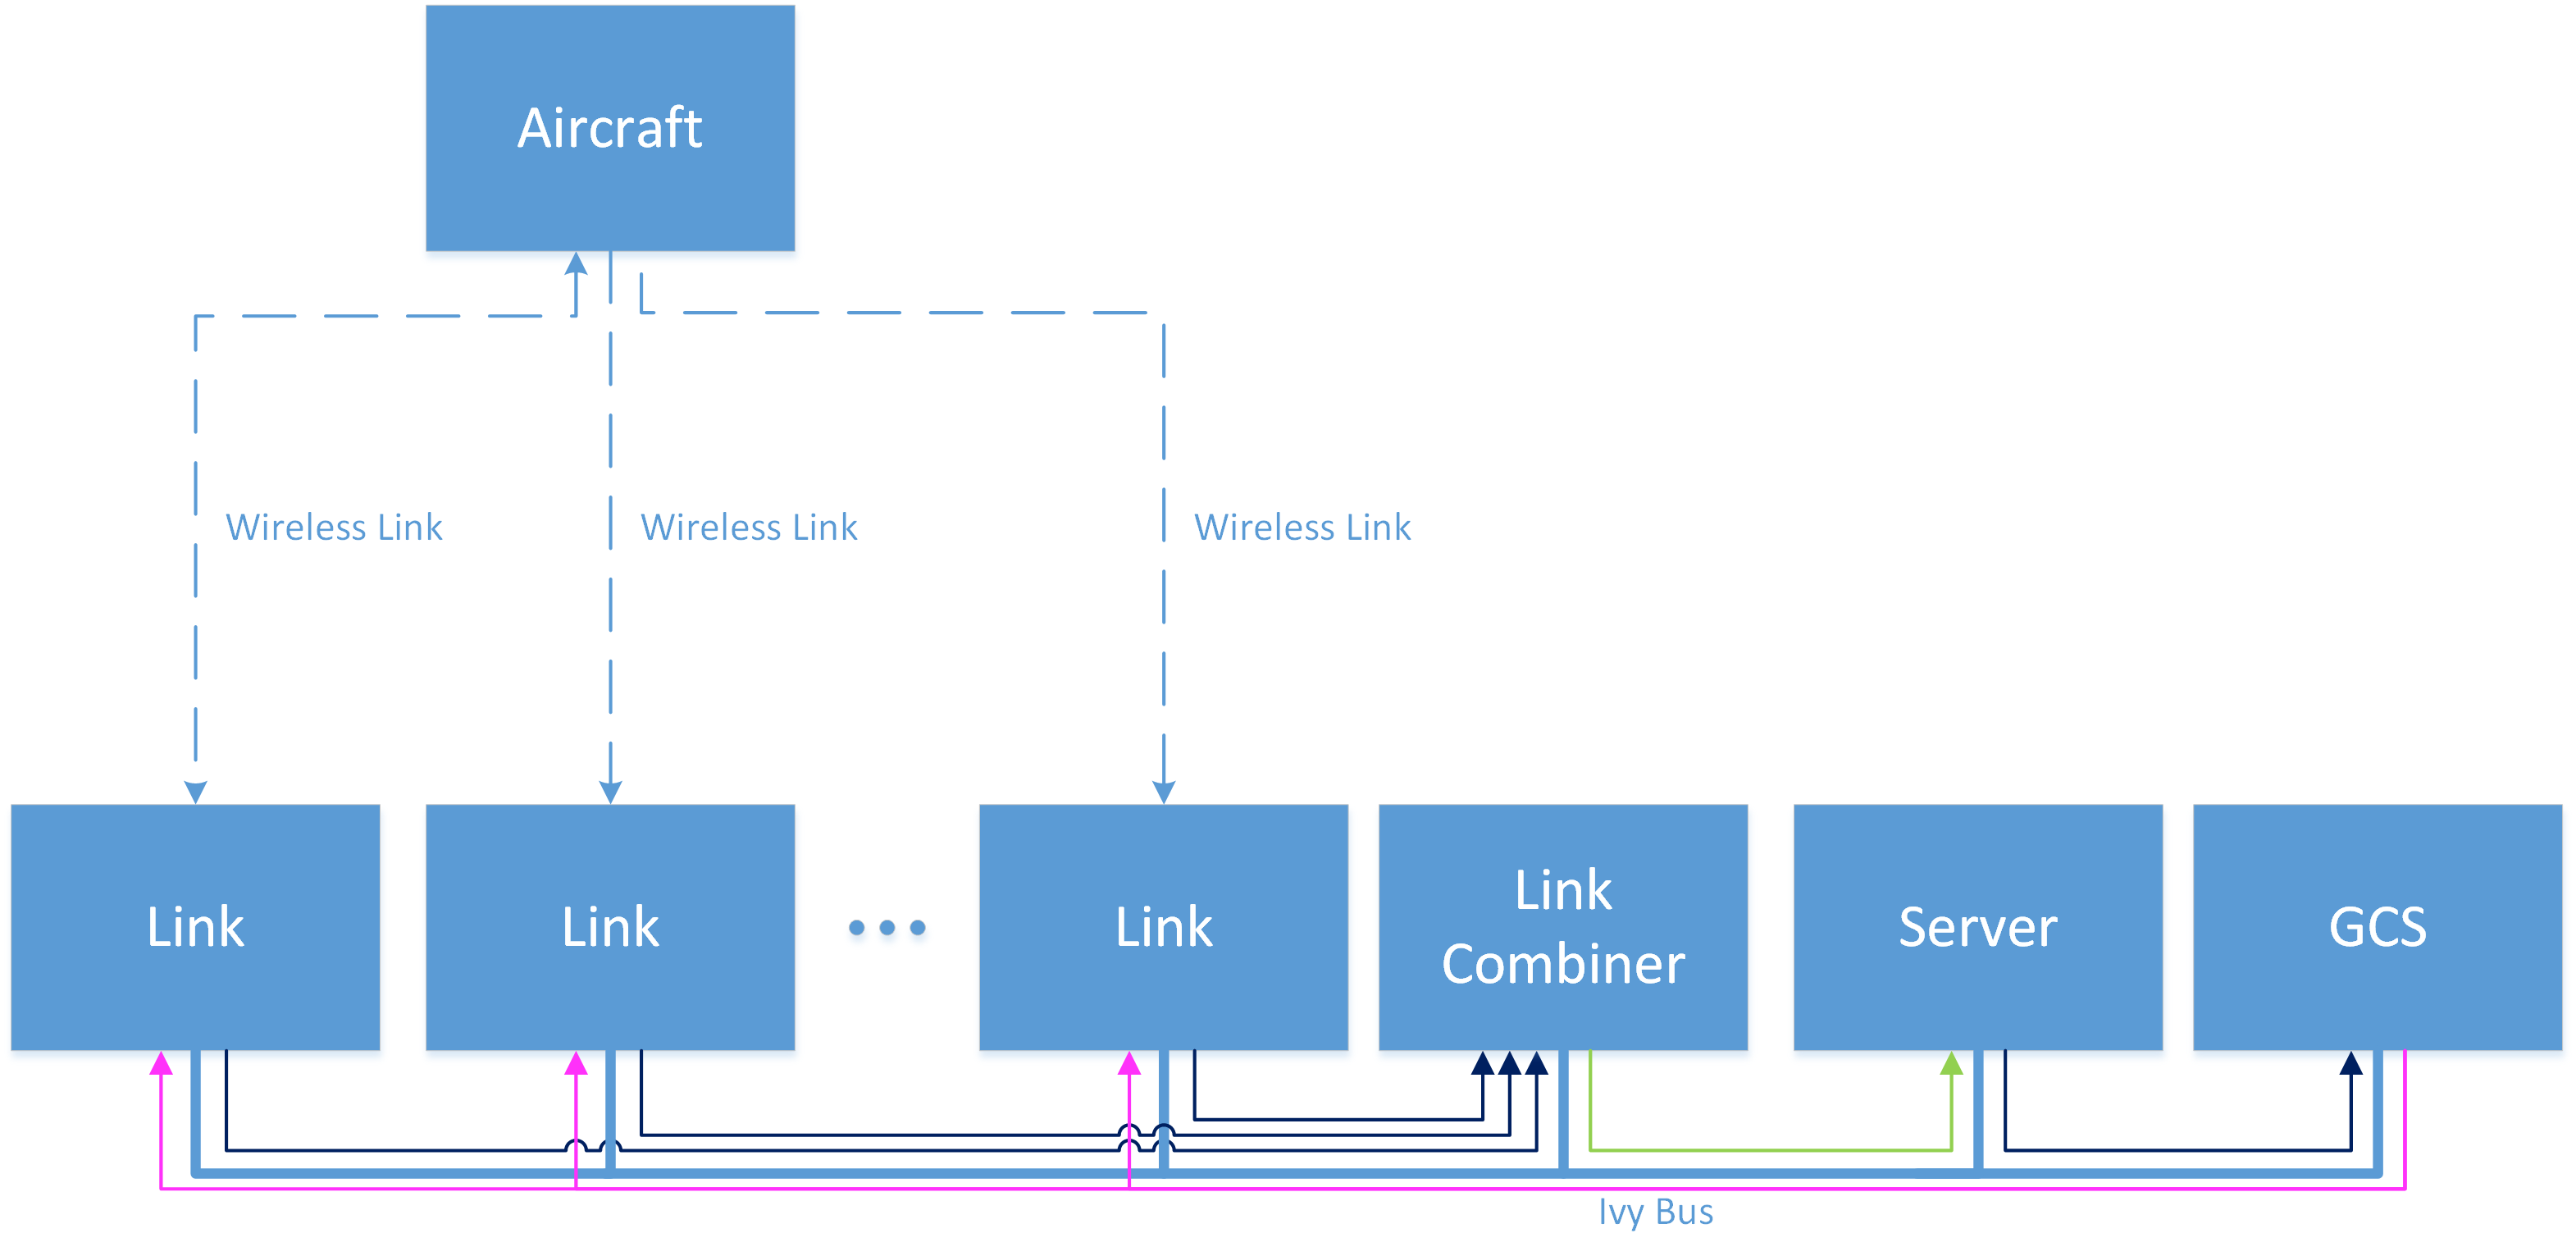 Block diagram of agents in the ground segment when redundant links are used